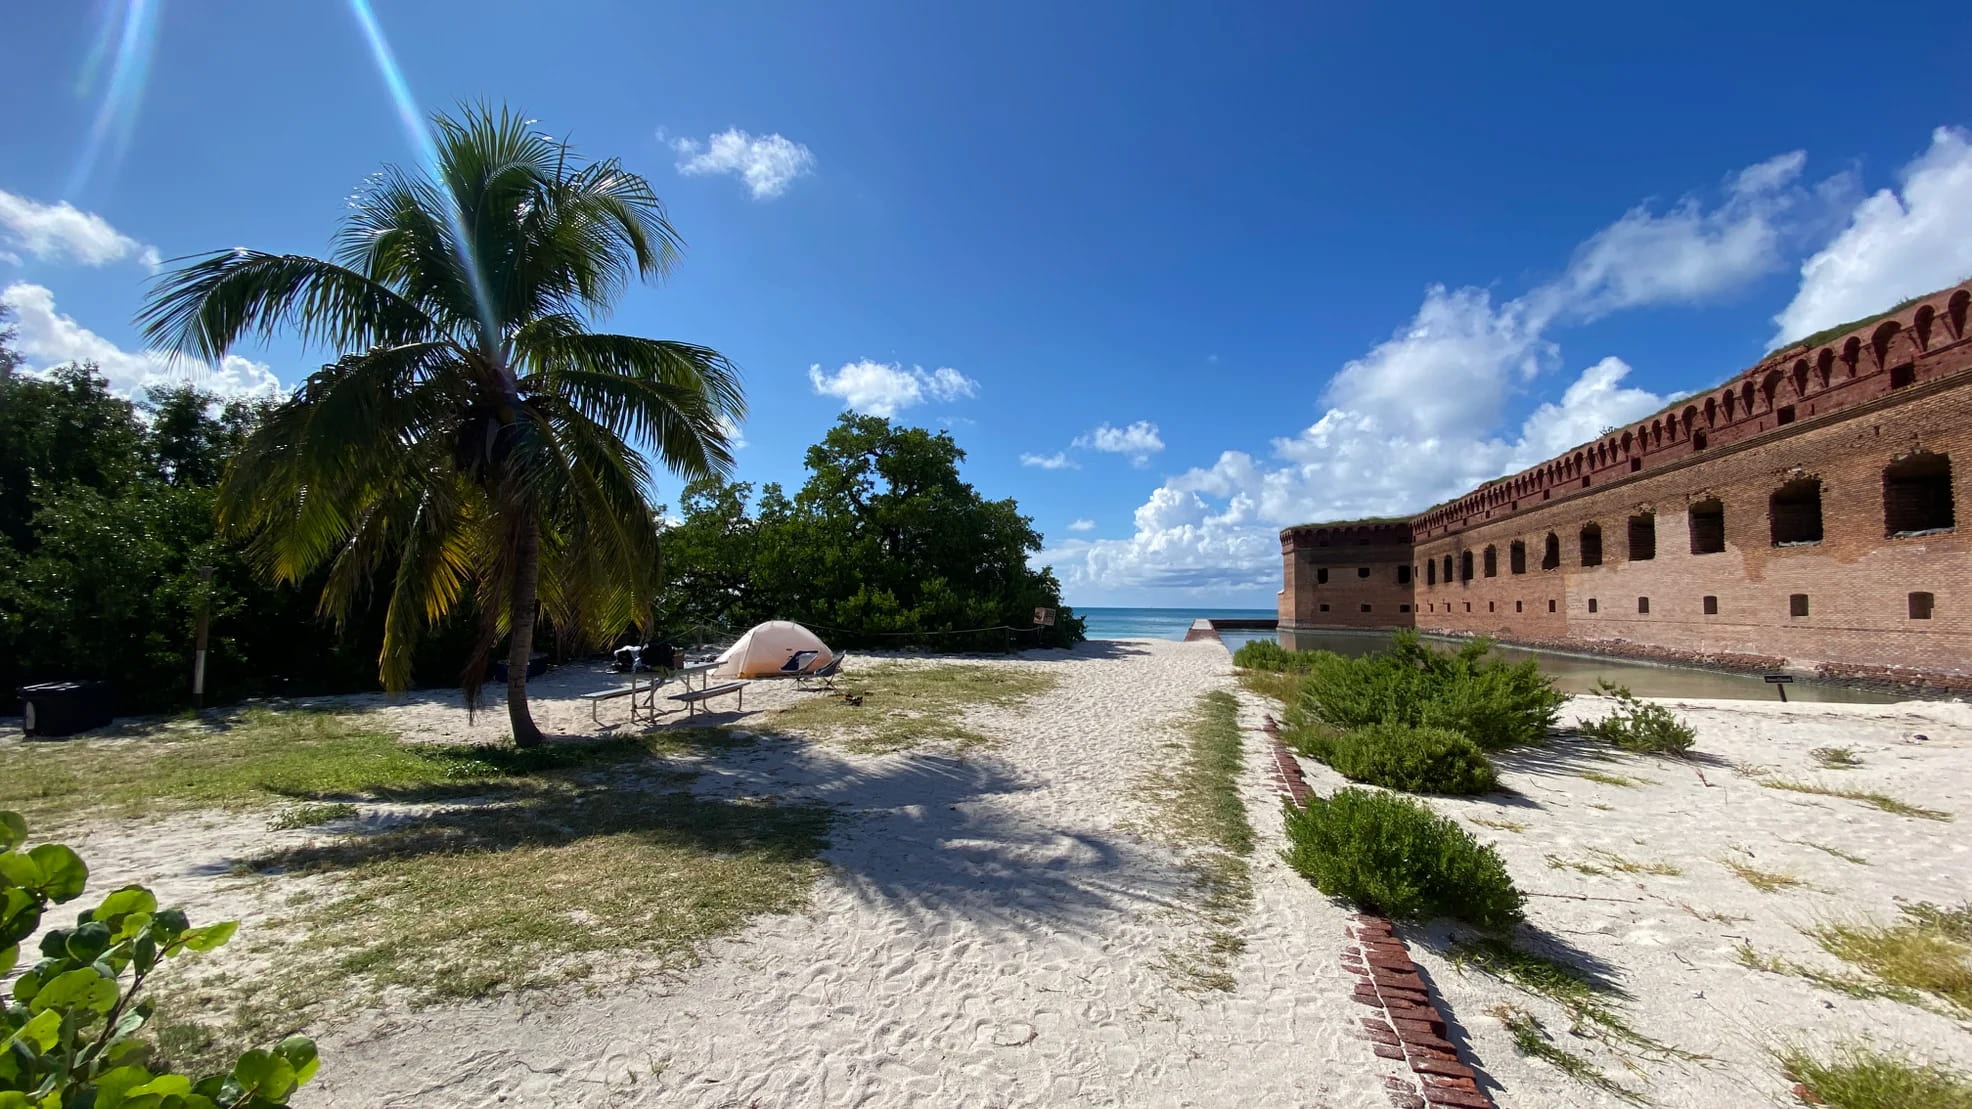 Tent pitched on beach below palm tree on the island of Dry Tortugas National Park.